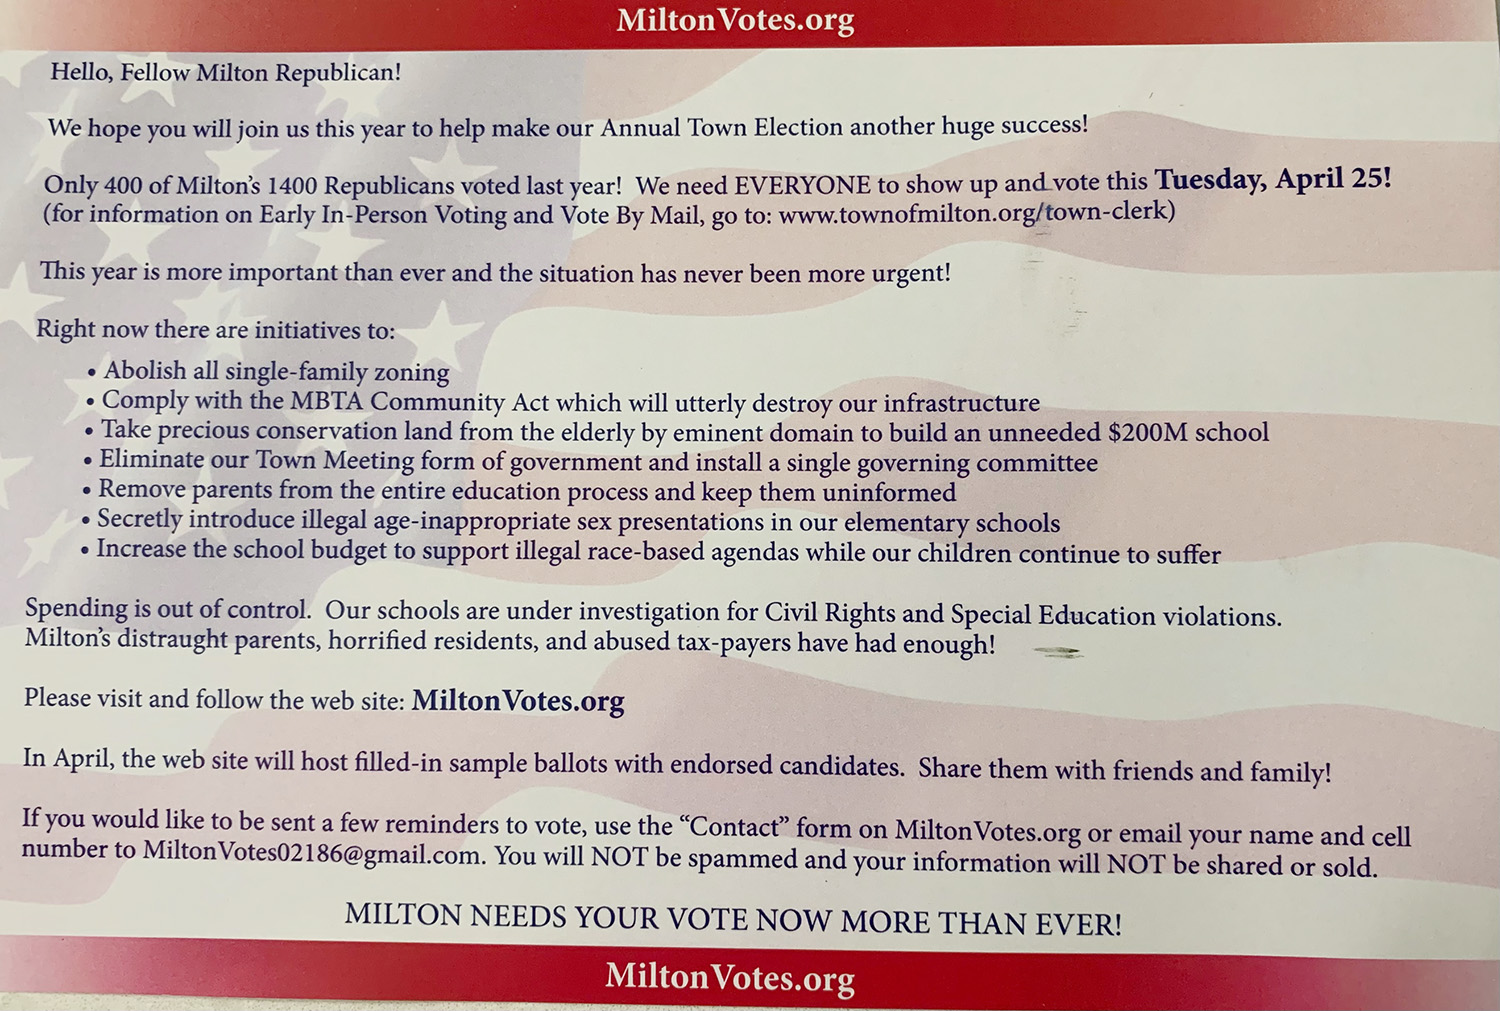 flyer sent out by miltonvotes